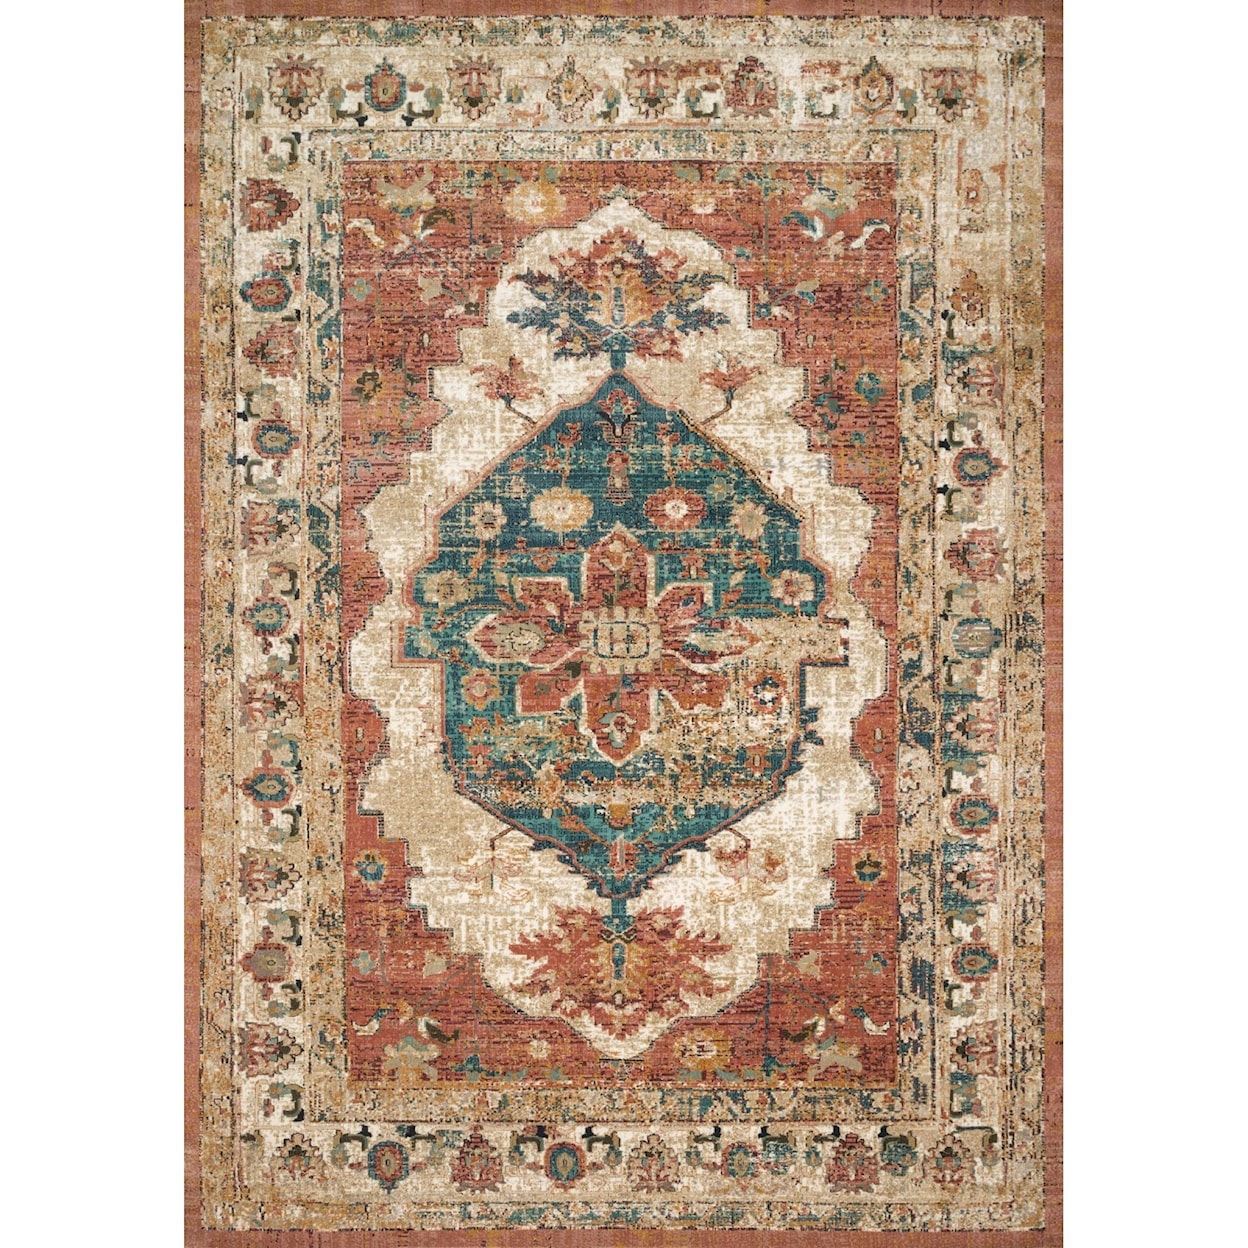 Magnolia Home by Joanna Gaines for Loloi Evie 5'-1" x 7'-8" Rug